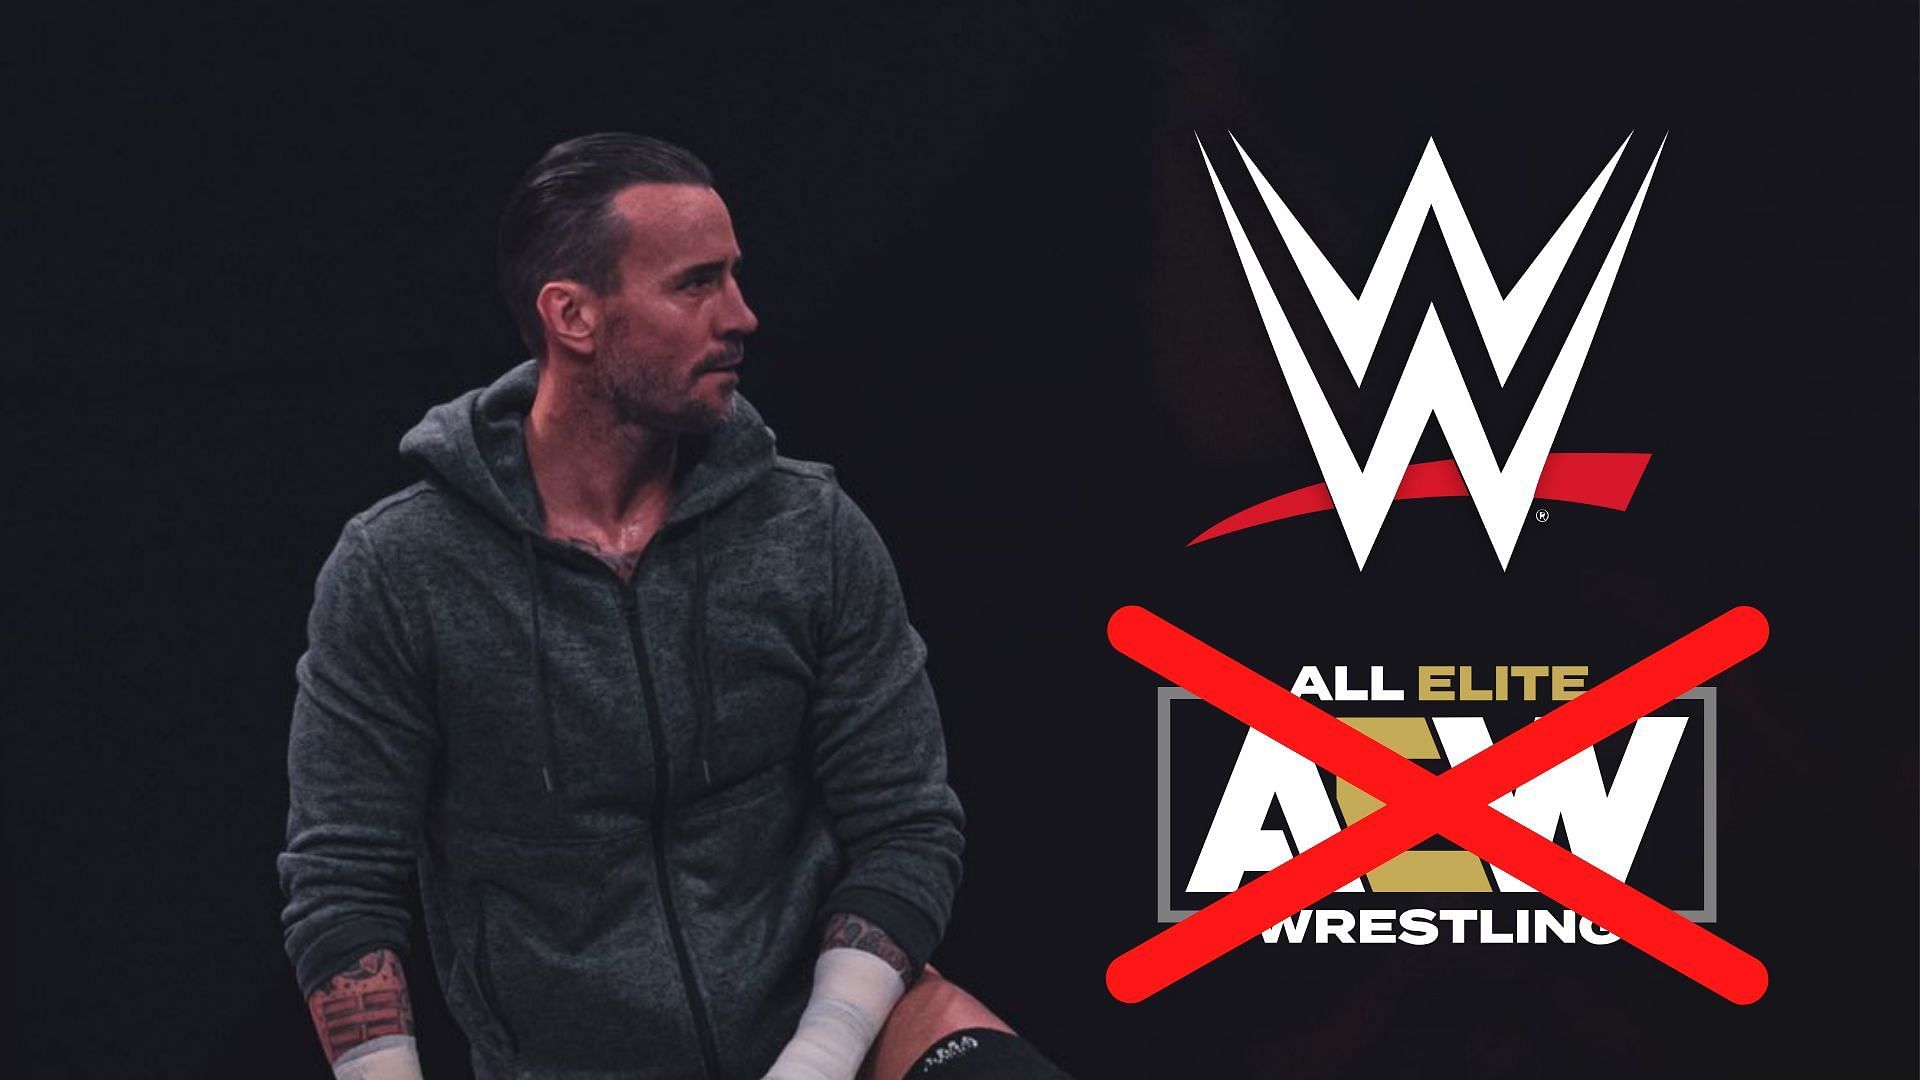 What will convince CM Punk to leave AEW and return to WWE?